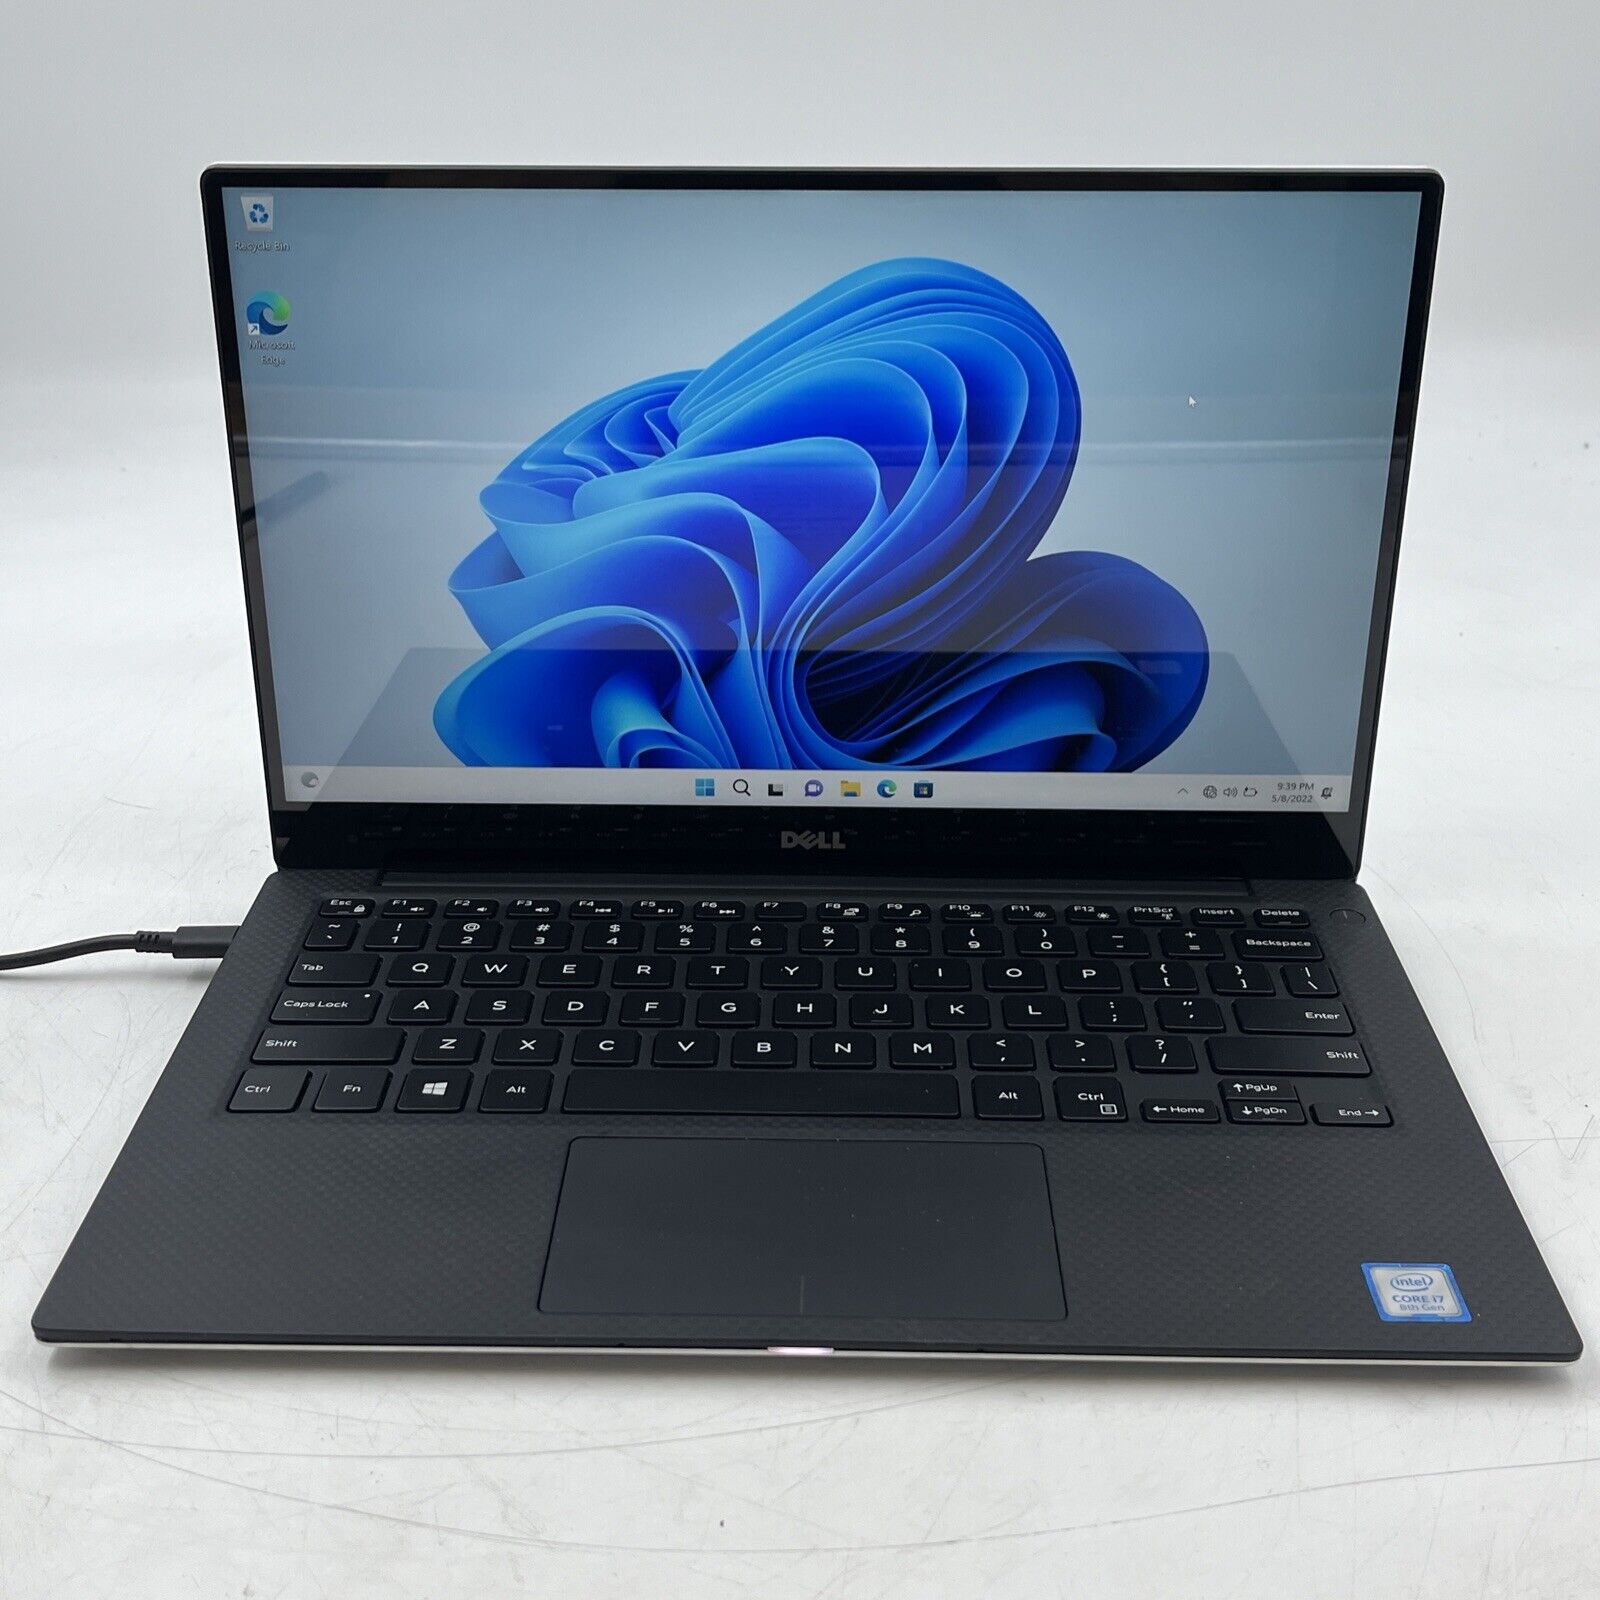 Dell XPS 9360 Touch i7-8550U 1.8GHz 16GB 128GB SSD